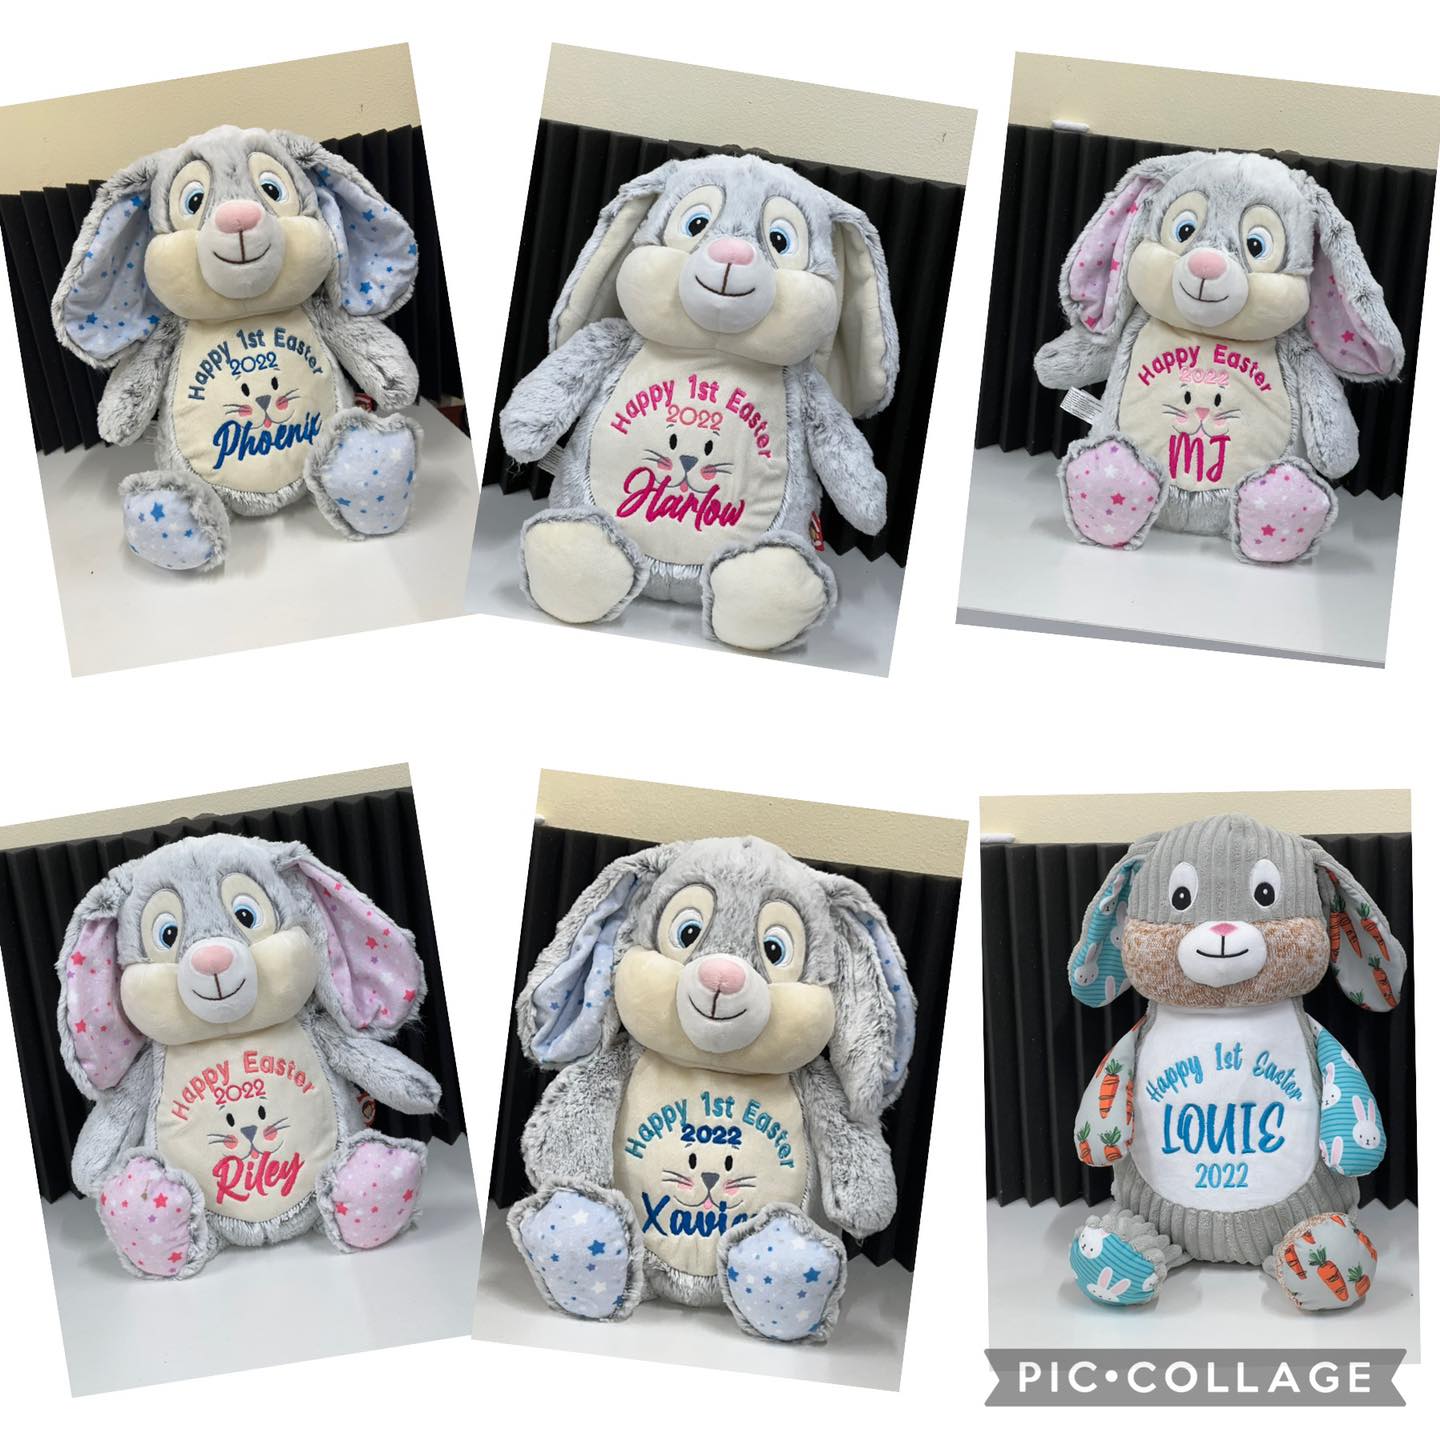 Easter Cubby Bears with personalised embroidery